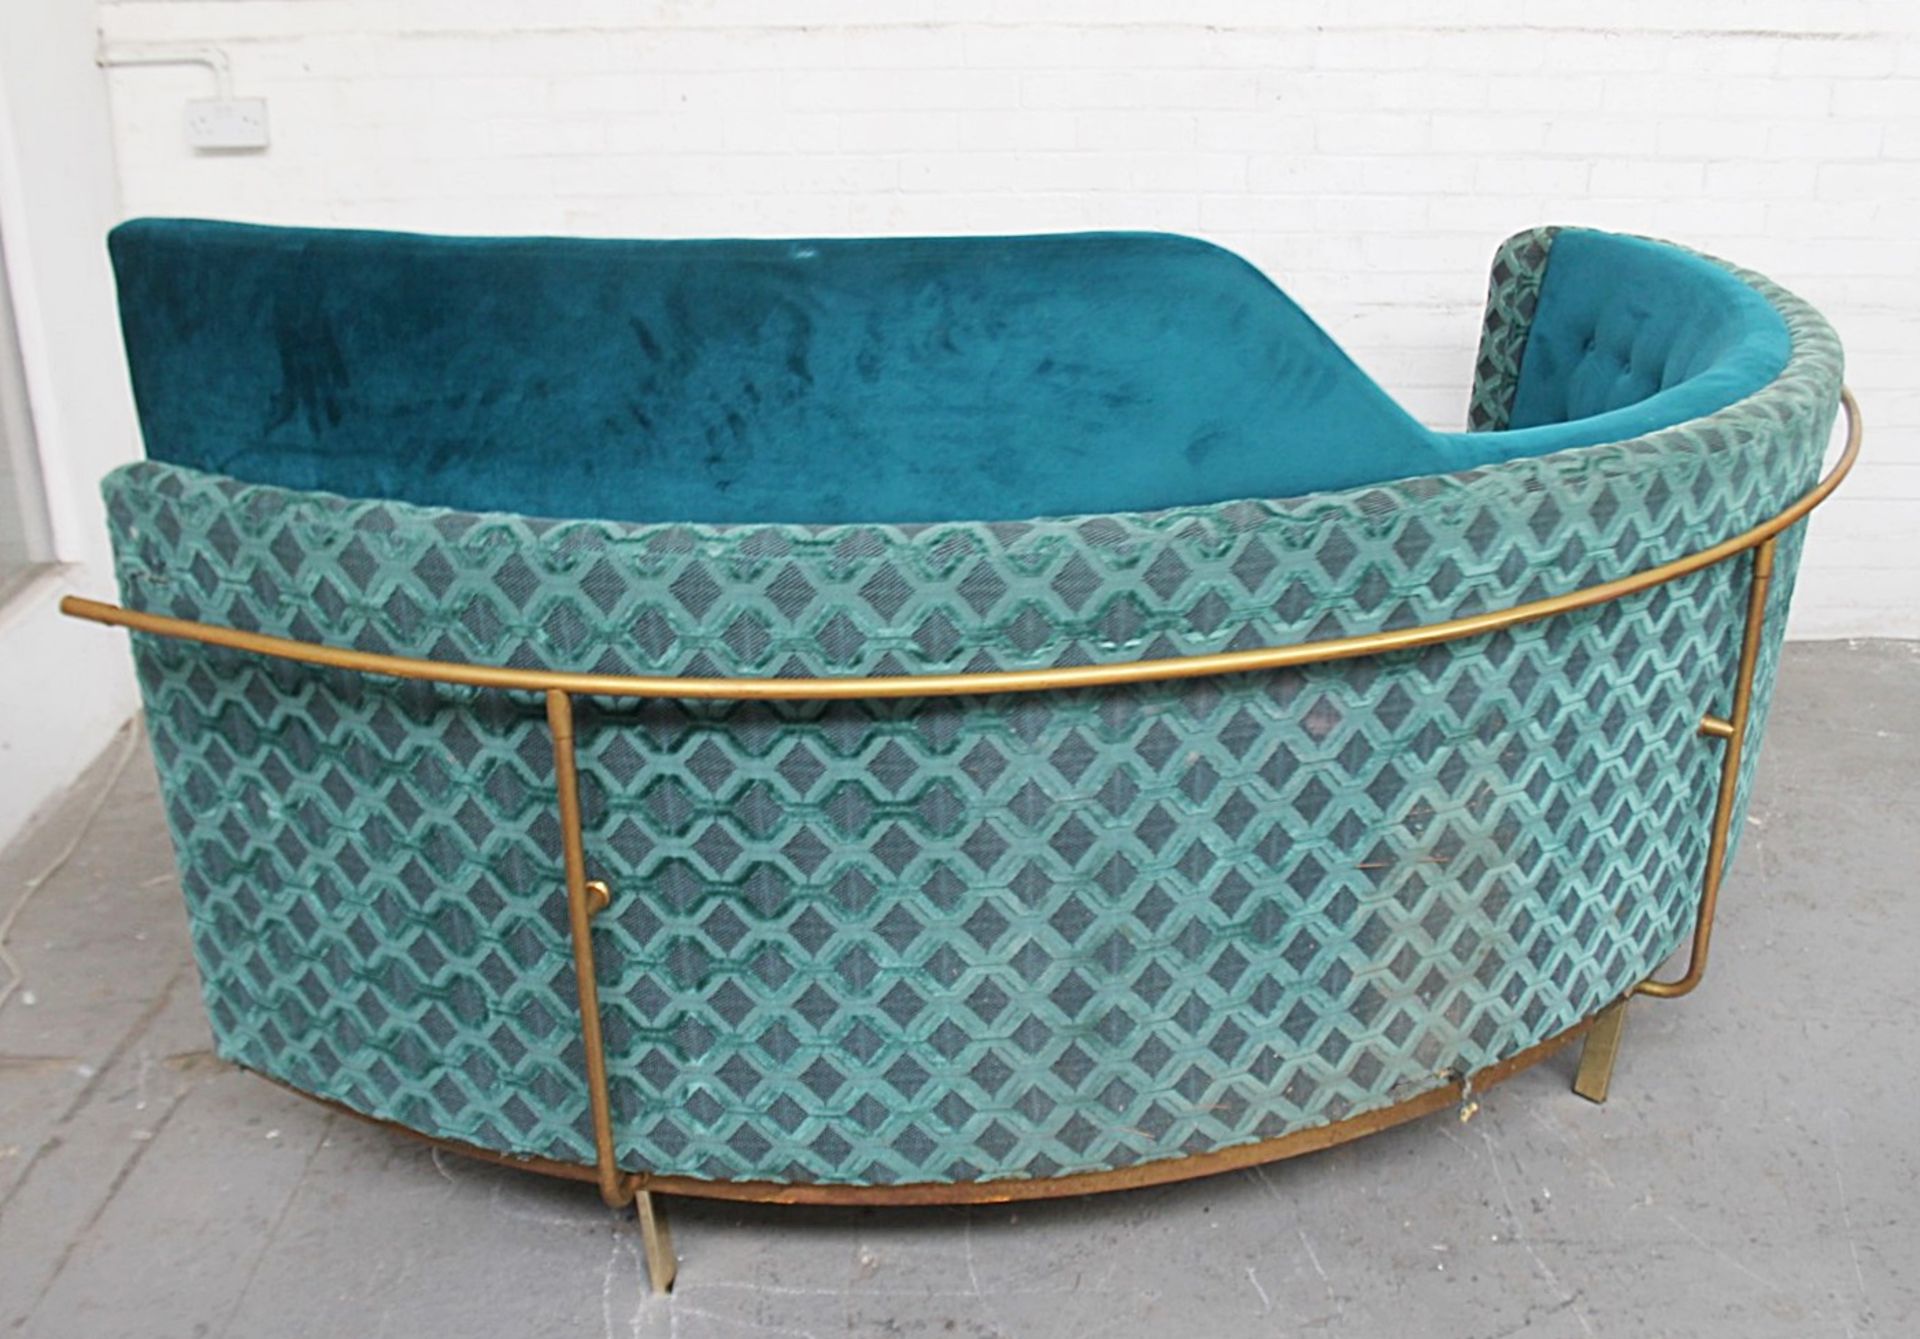 1 x Bespoke Commercial Curved C-Shaped Booth Seating Upholstered In Premium Teal Coloured Fabrics - - Image 16 of 17